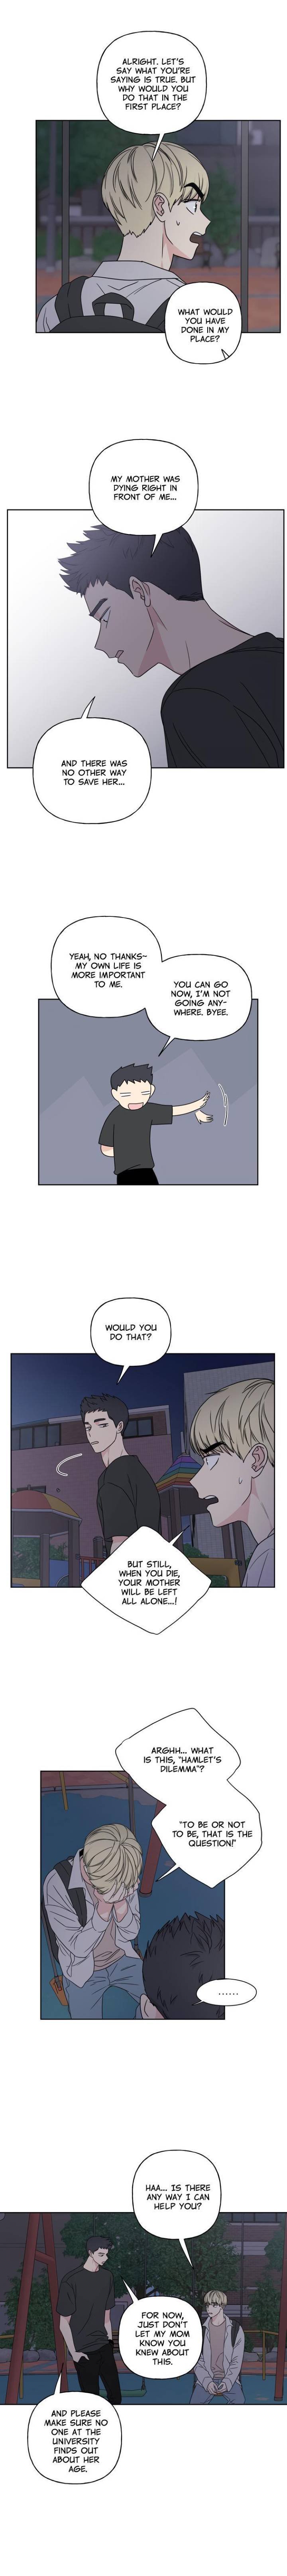 mother-im-sorry-chap-22-4